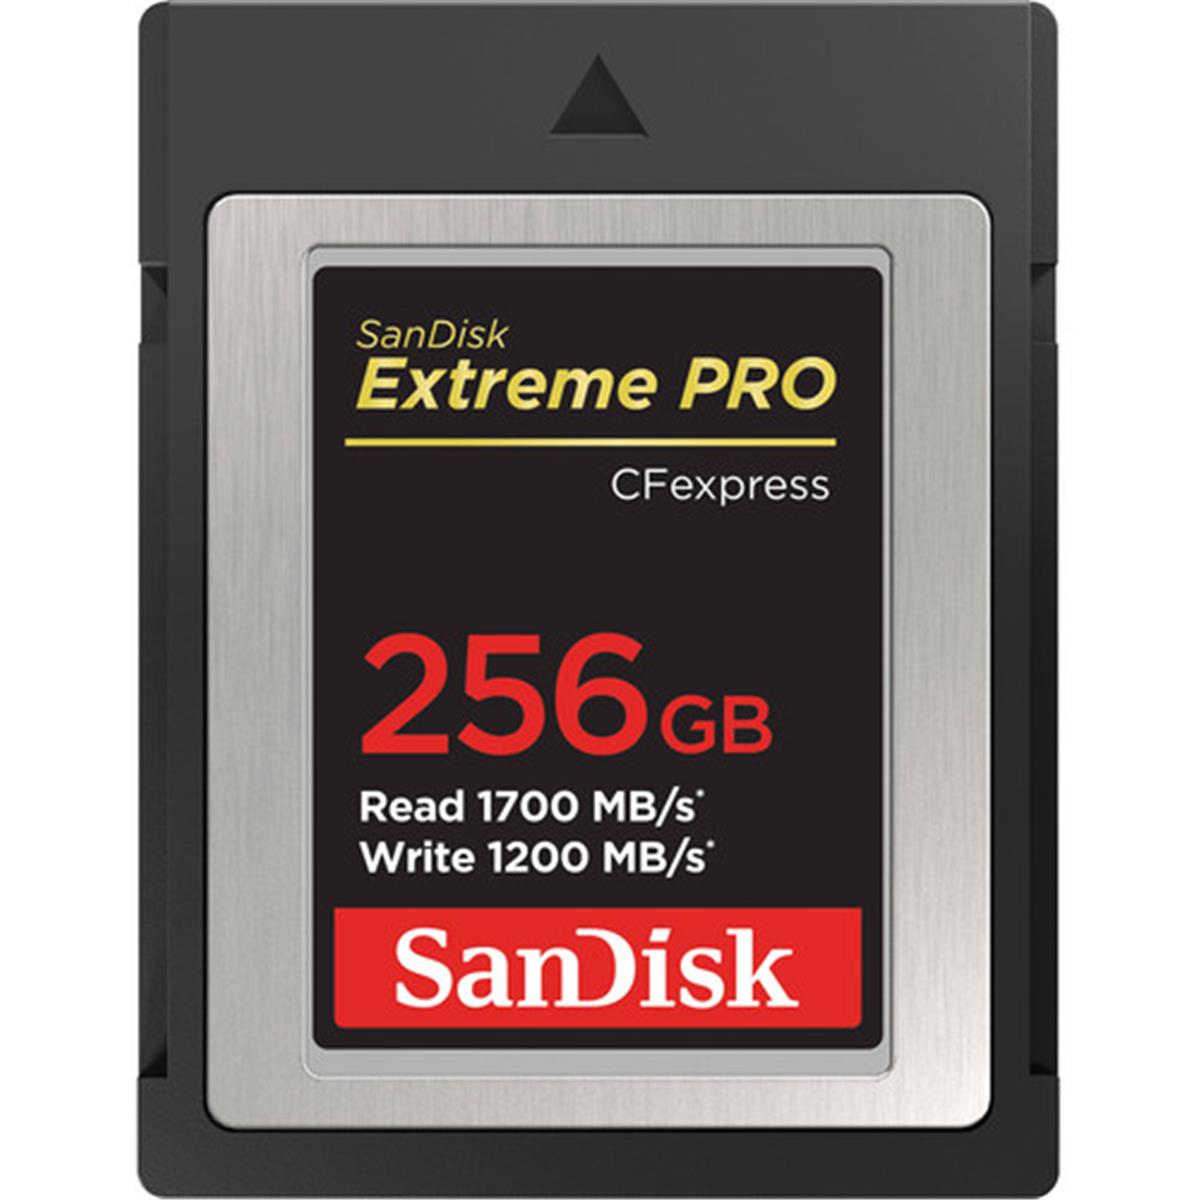 Picture of Sandisk SDCFE-256G-ANCNN 256GB 1700 & 1200 MB Extreme Pro Fexpress Card